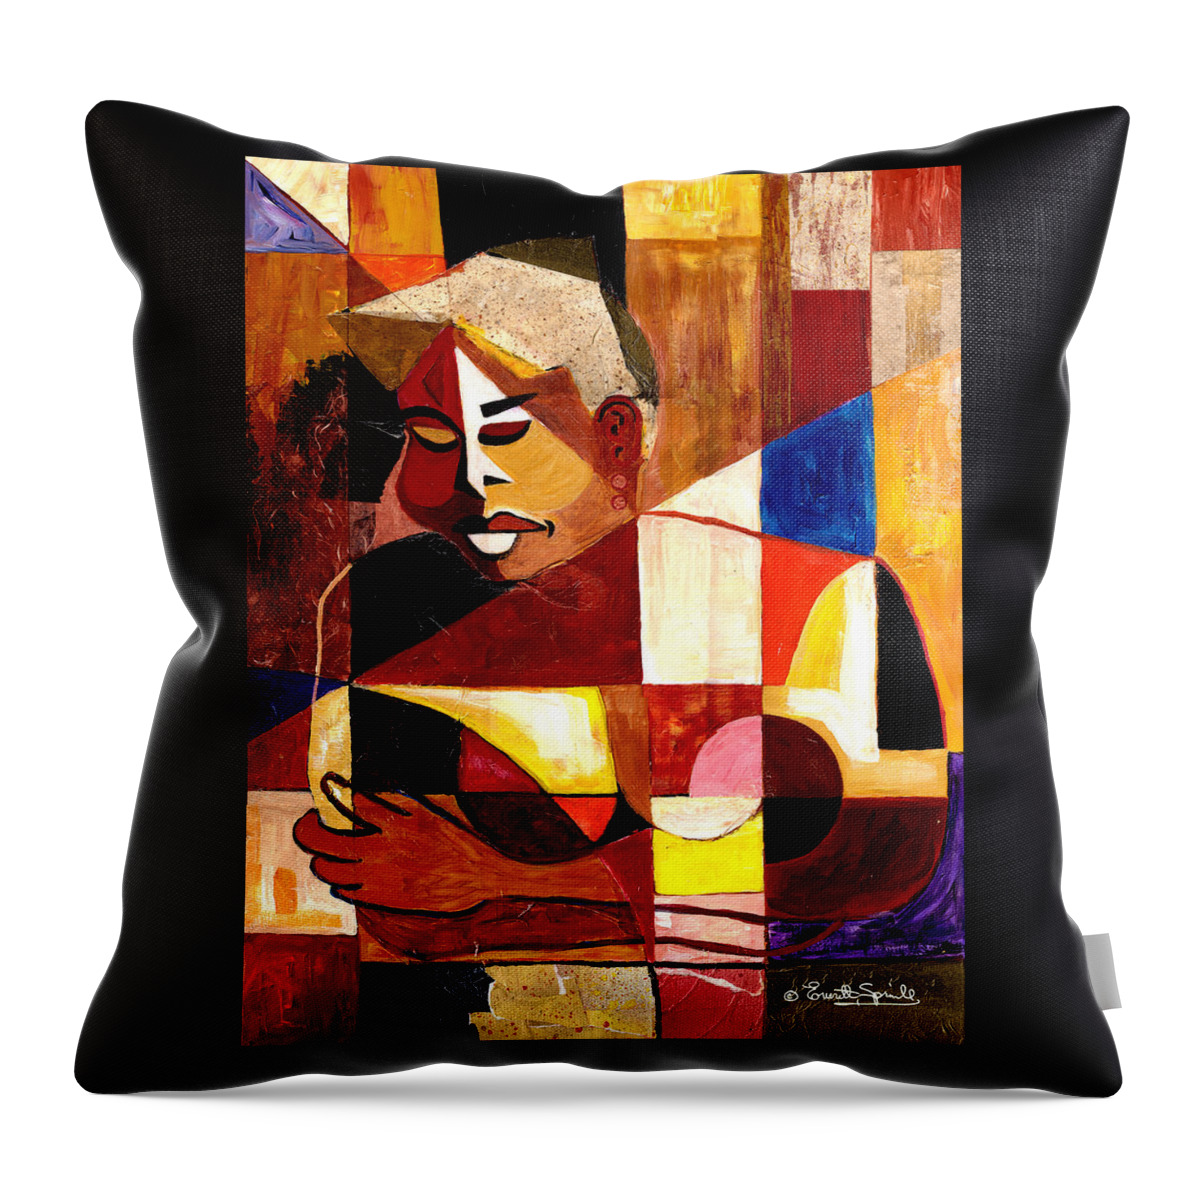 Everett Spruill Throw Pillow featuring the painting The Matriarch - Take 2 by Everett Spruill